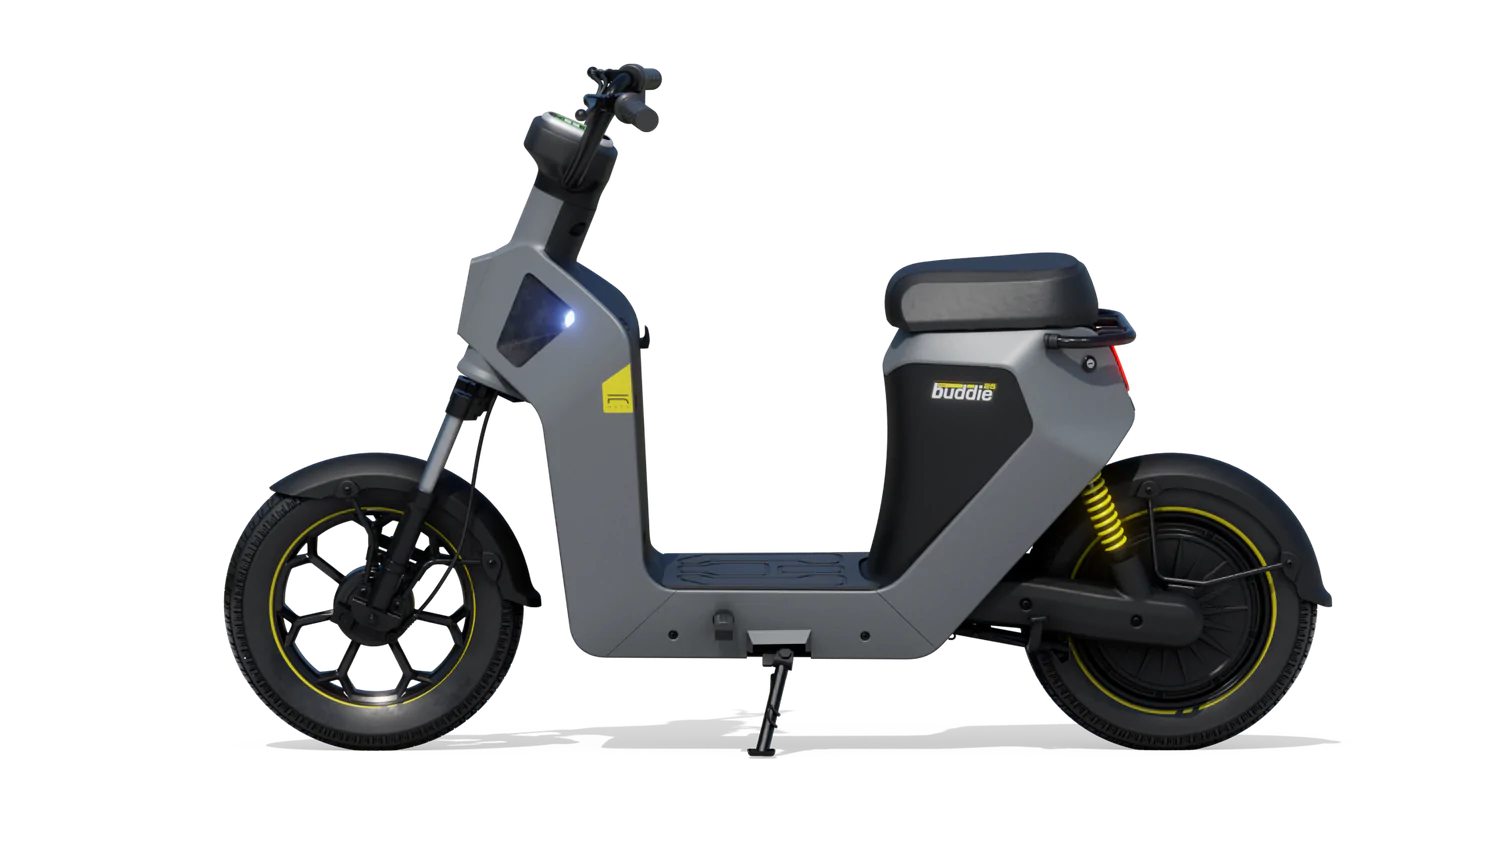 Revamp Moto RM 25 02 STD with Grey color